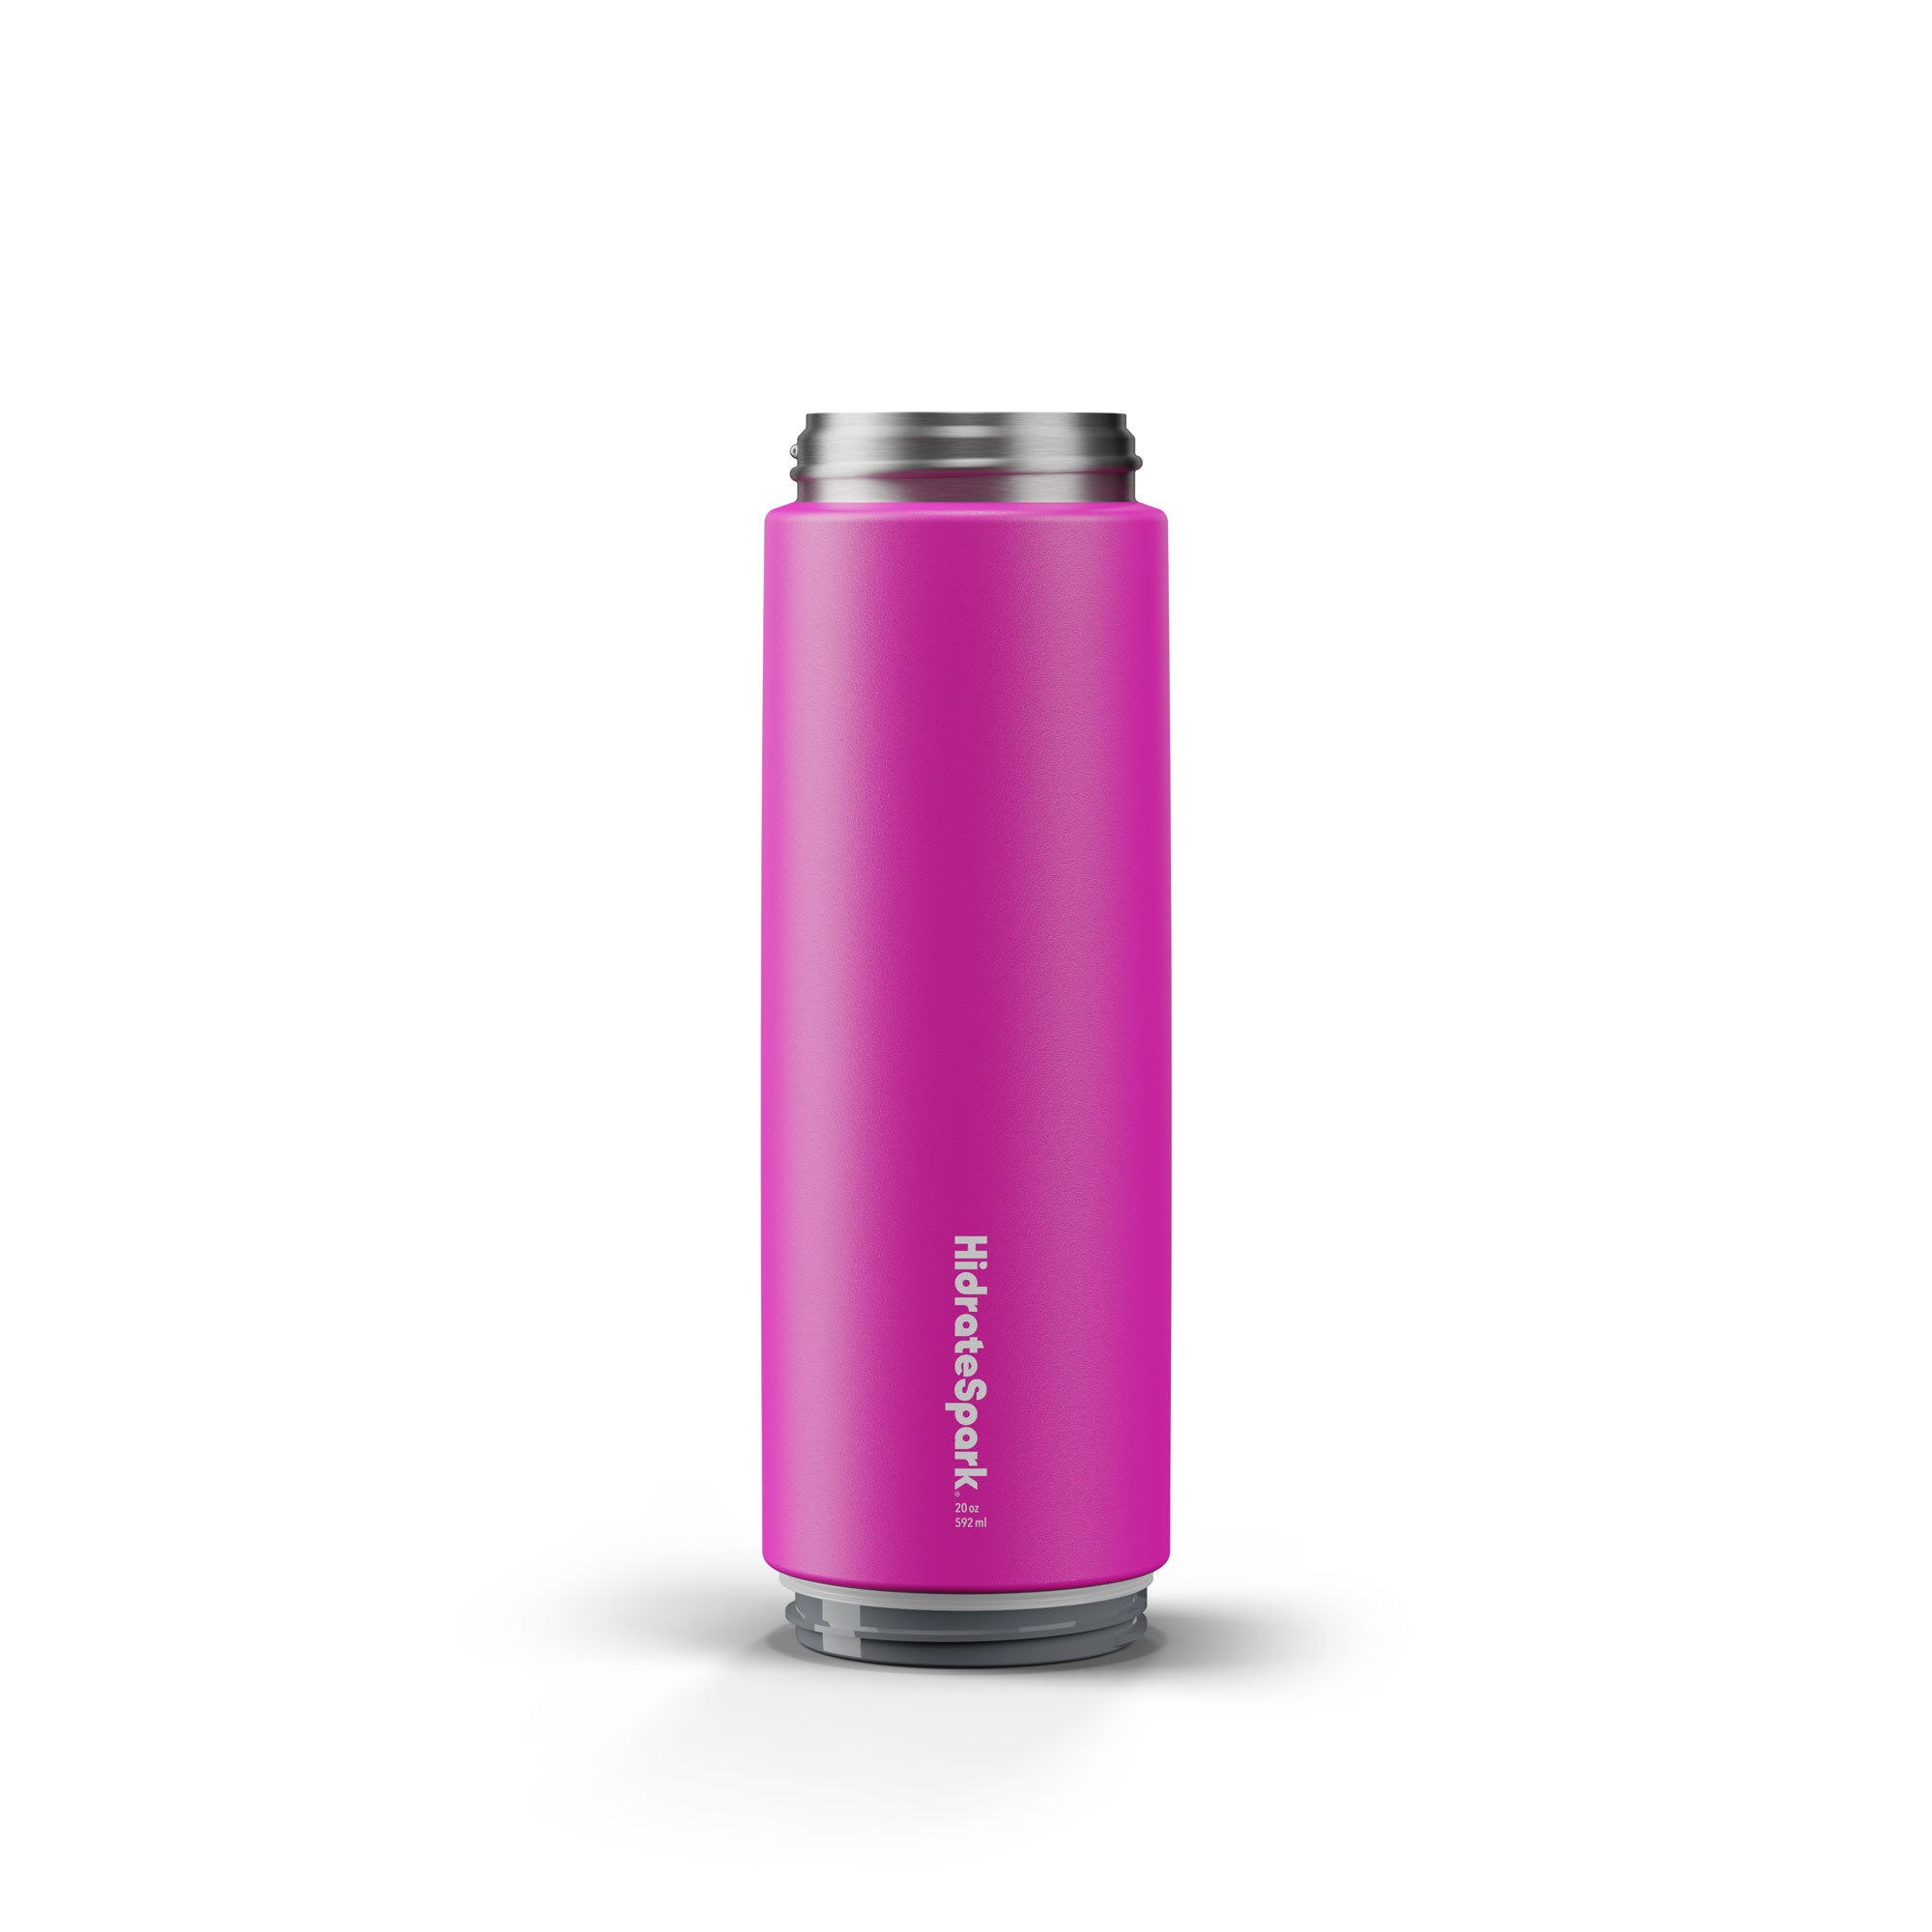 HidrateSpark TAP Insulated Stainless Steel Smart Water Bottle Body | 20 oz / 592 ml